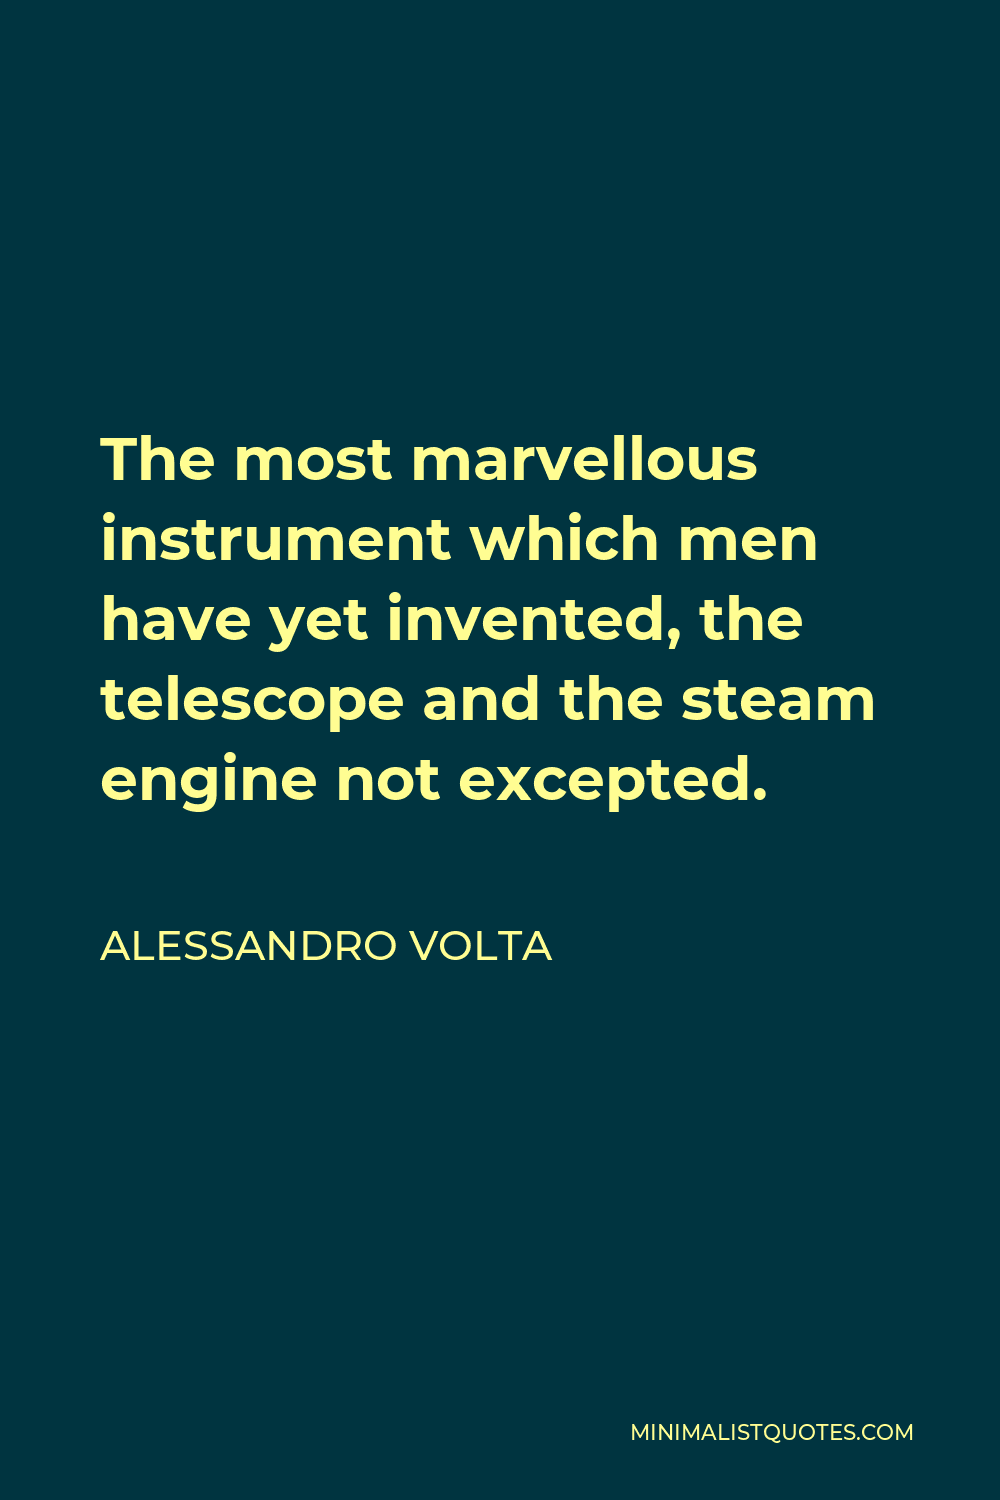 Alessandro Volta Quote - The most marvellous instrument which men have yet invented, the telescope and the steam engine not excepted.